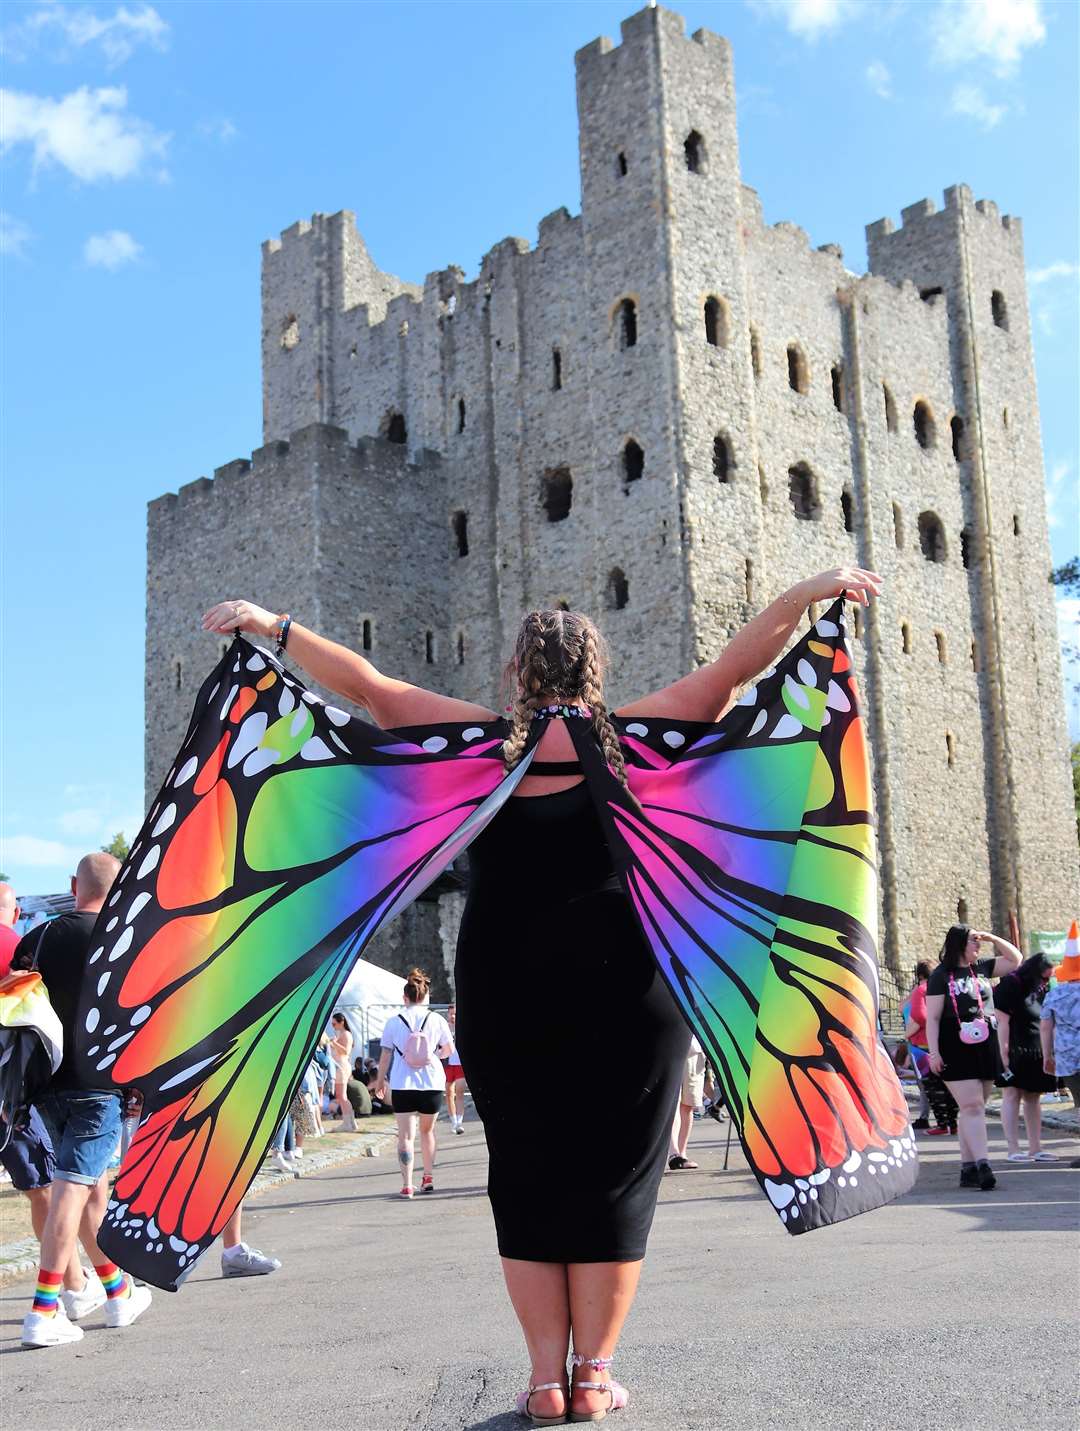 The event was held at Rochester Castle. Picture: Rachel Evans